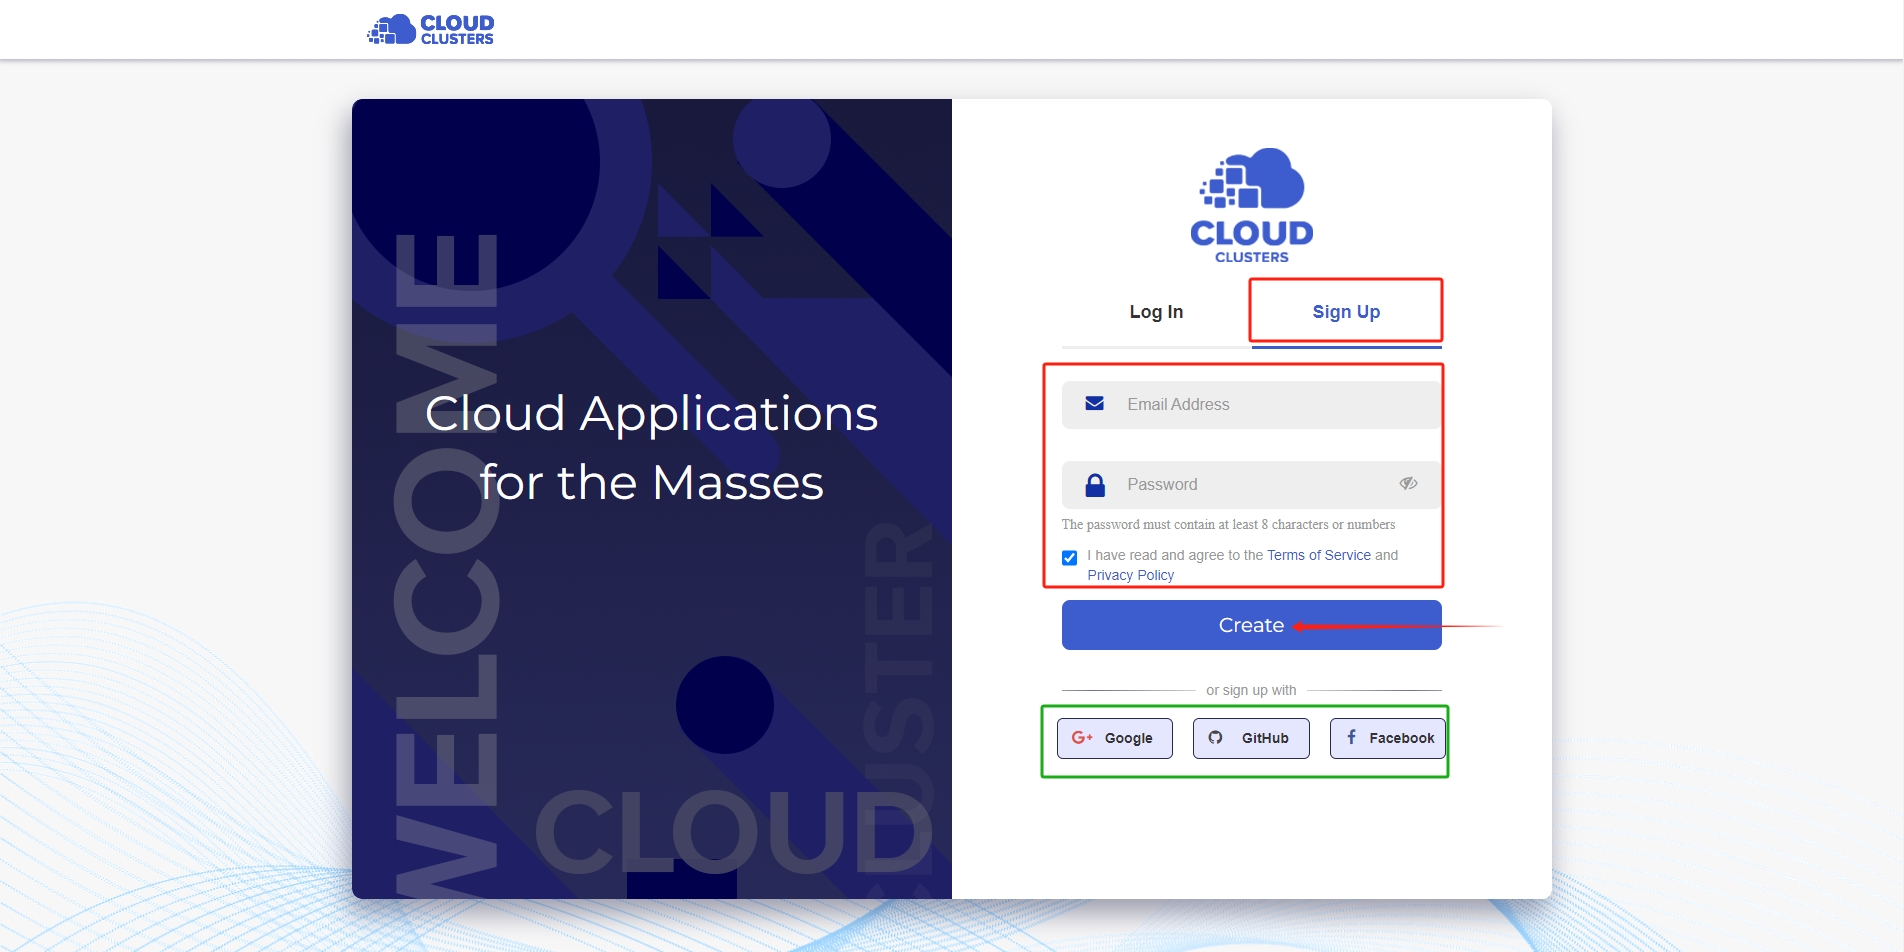 Sign up for a Cloud Clusters account